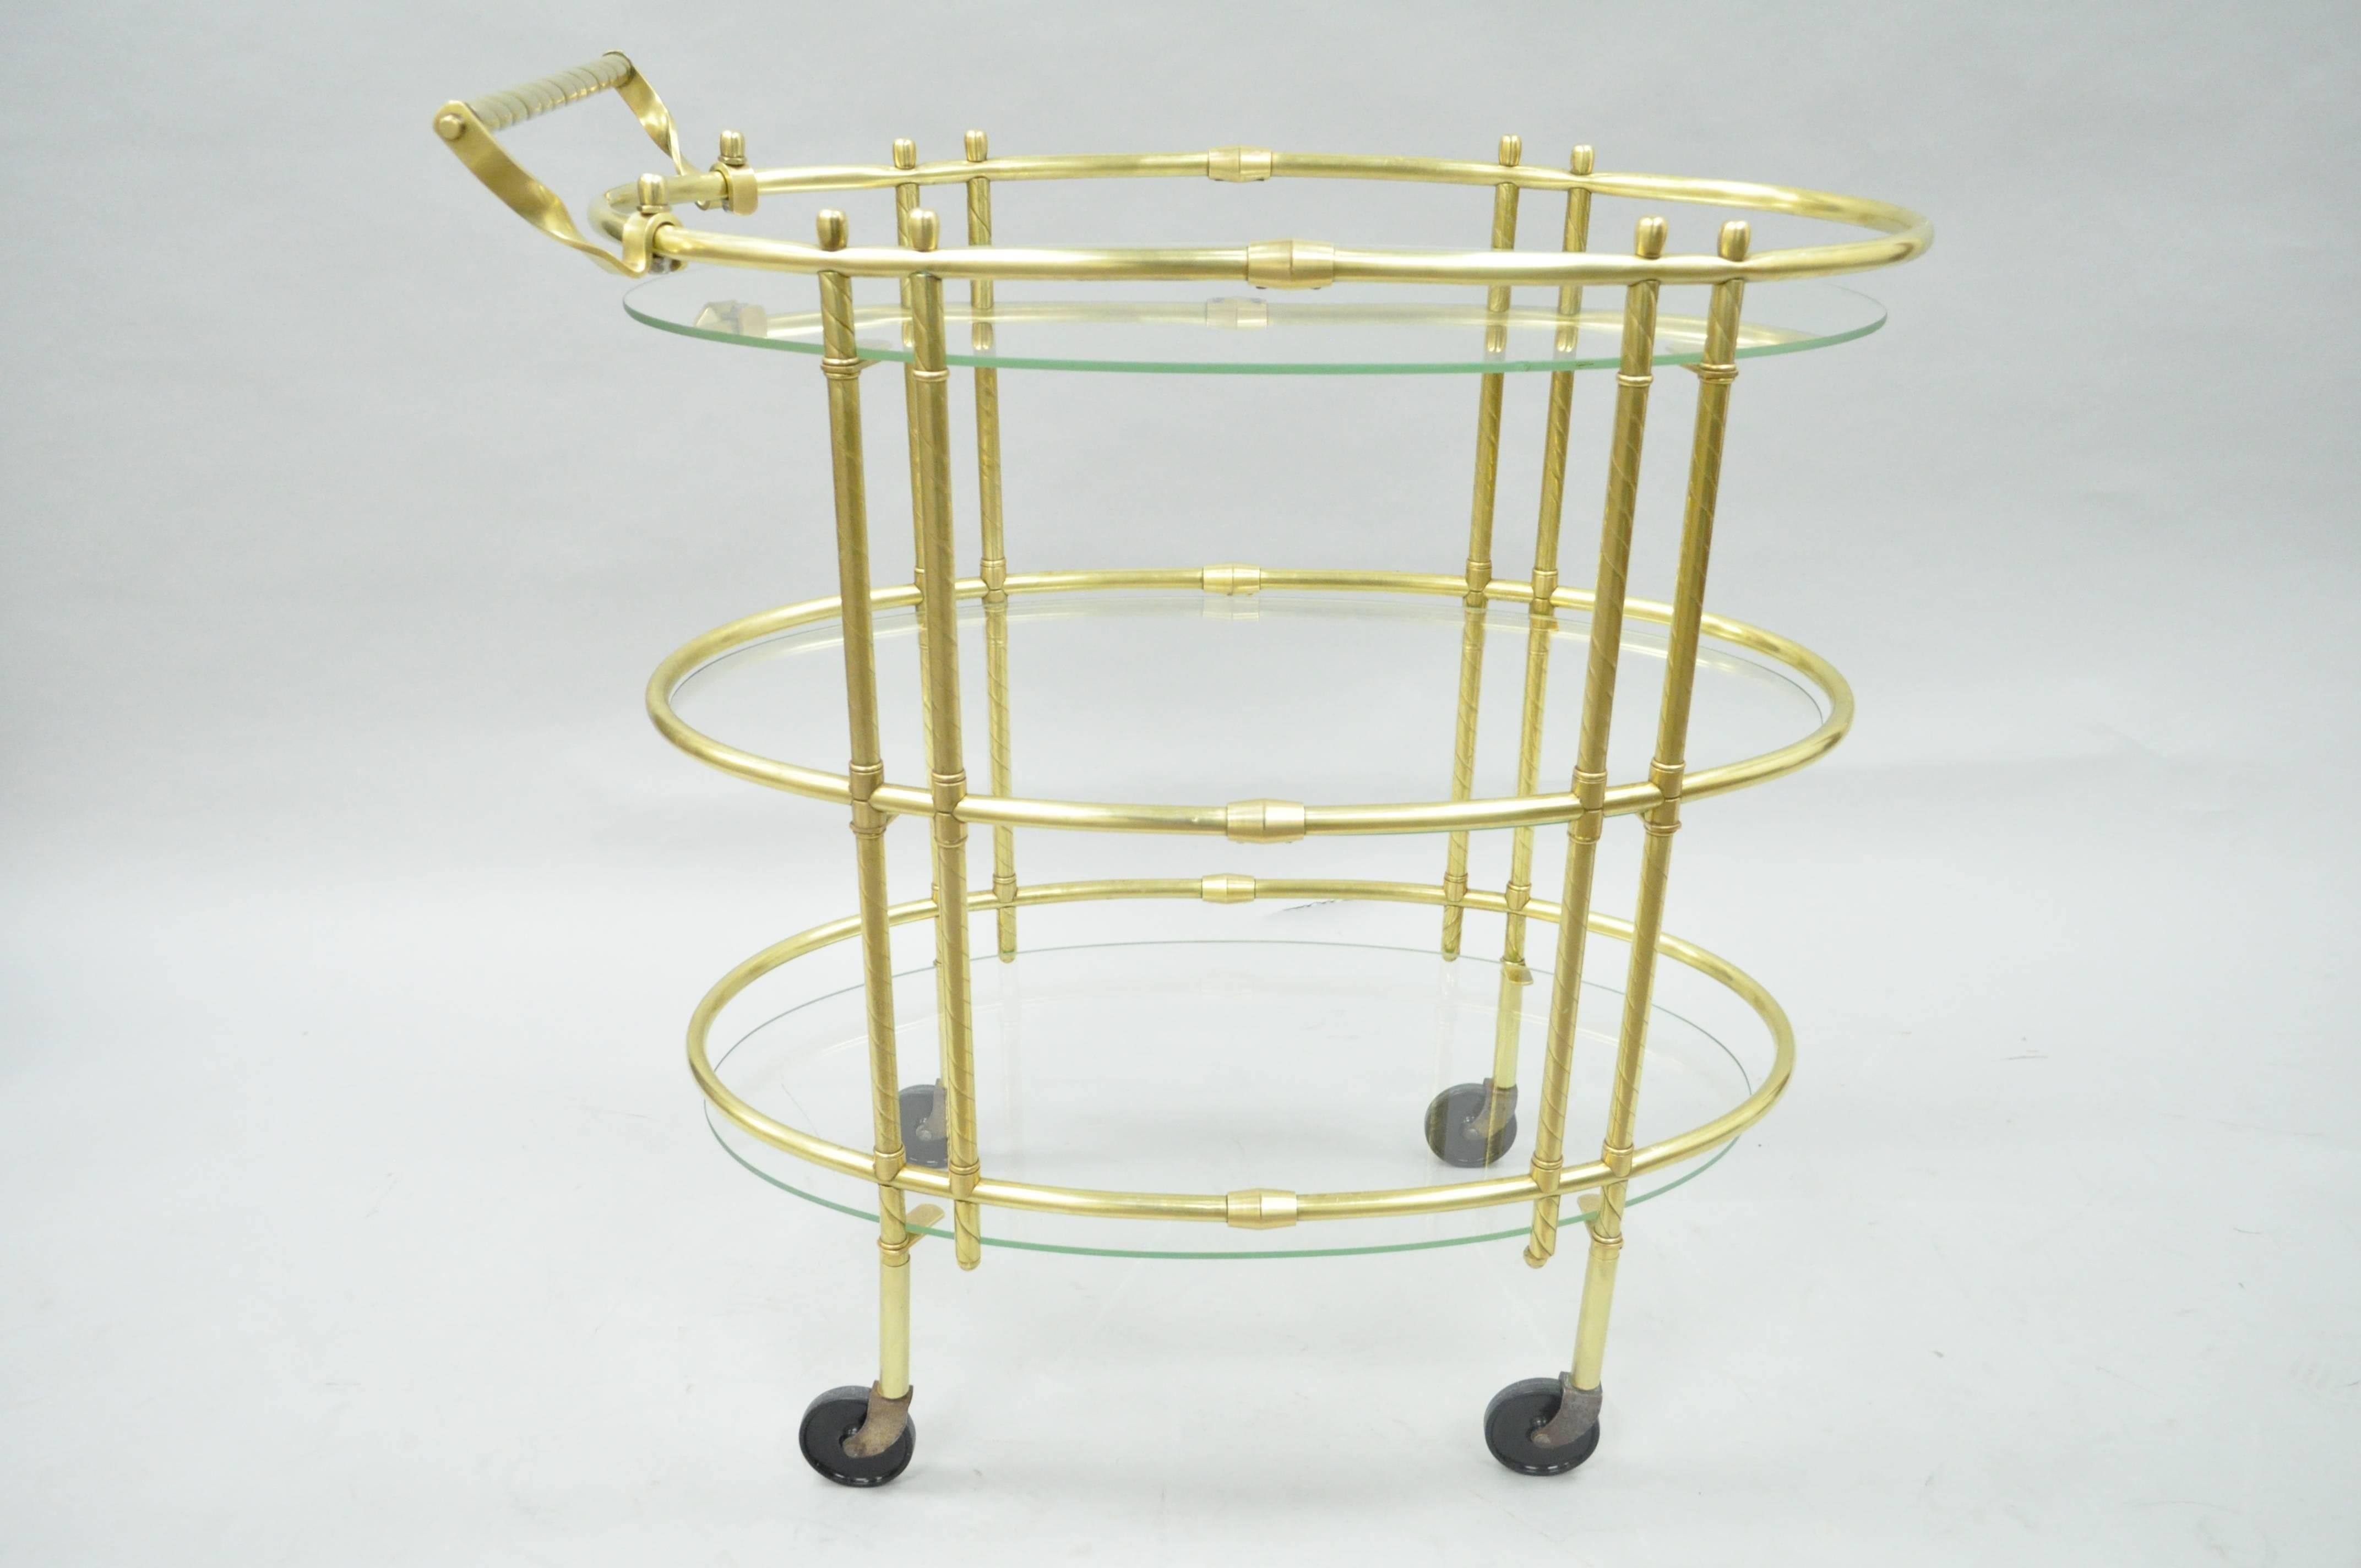 Vintage Mid-Century Italian Modern polished brass three-tier oval bar or tea cart. Item features a polished brass frame, oval floating form glass shelves, rolling casters, spiral turned handle, great Modernist form.